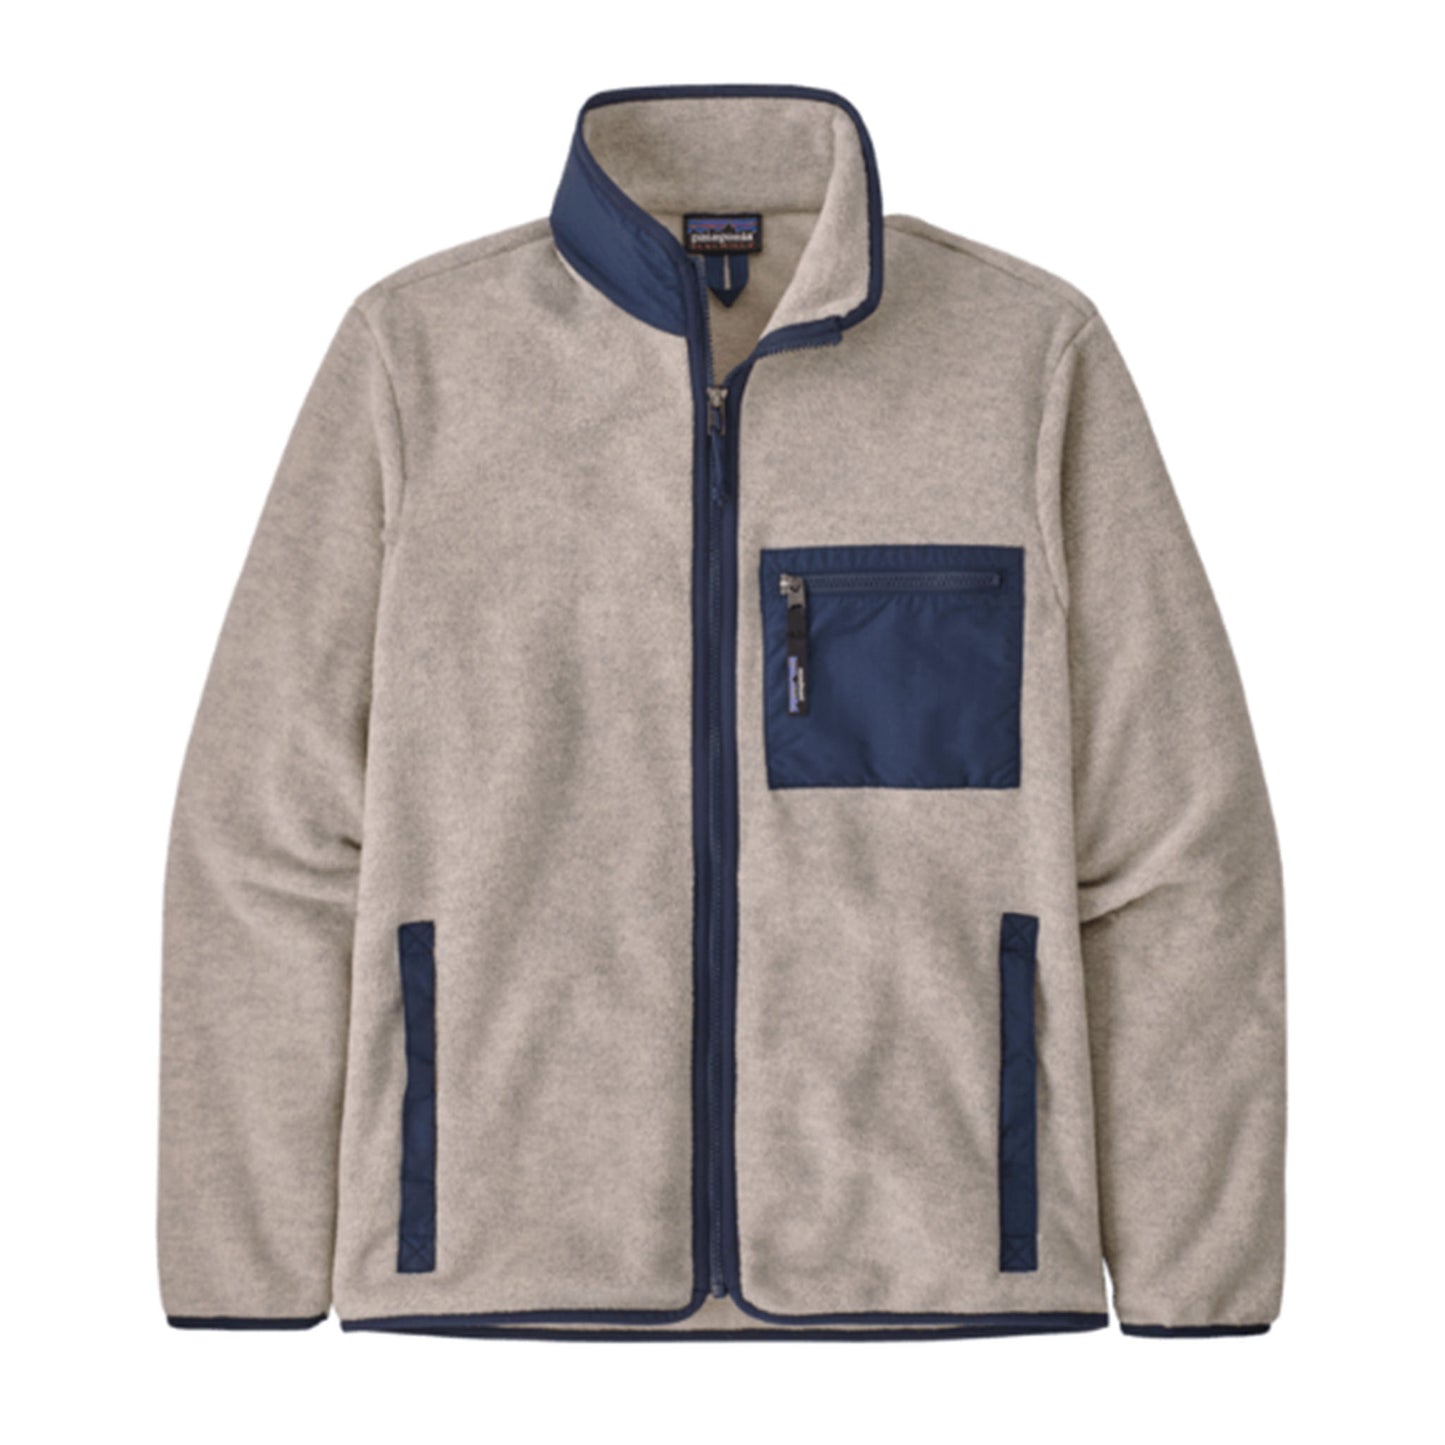 Patagonia Men's Synchilla Jacket In Oatmeal heather